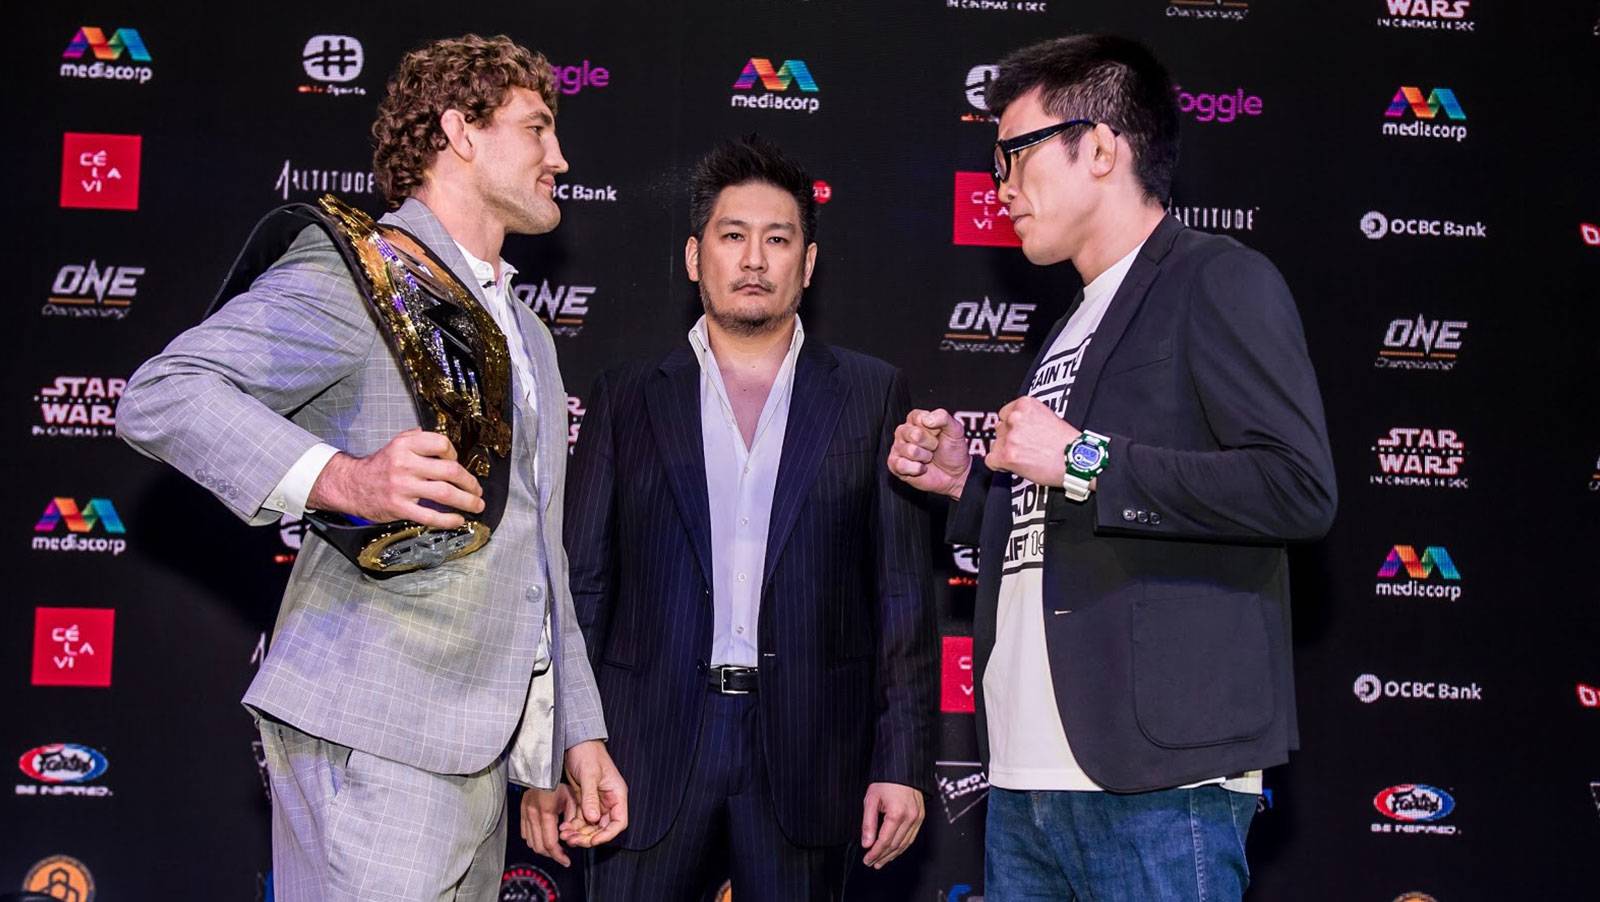 BEN ASKREN FACES OFF WITH SHINYA AOKI AT ONE: IMMORTAL PURSUIT KICK-OFF PRESS CONFERENCE